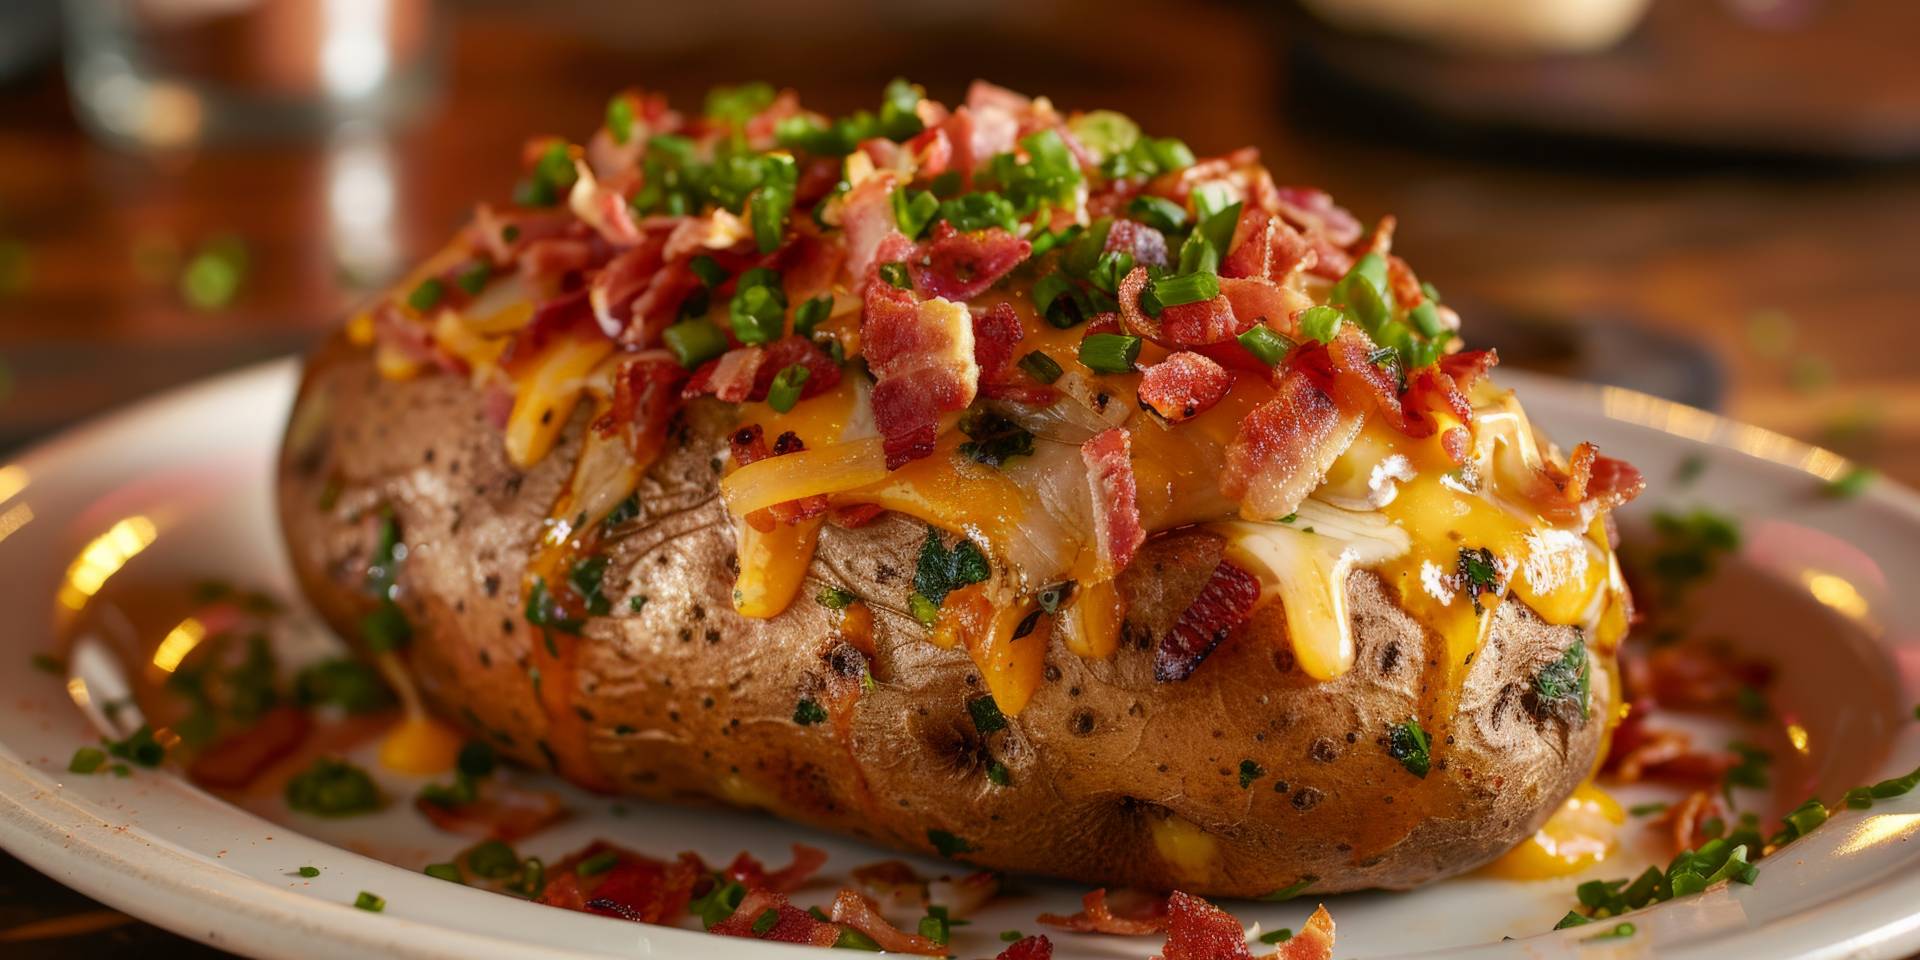 Loaded Baked Potato W/ Bacon, Chives, Broccoli, Cheese & BBQ Grilled Chicken